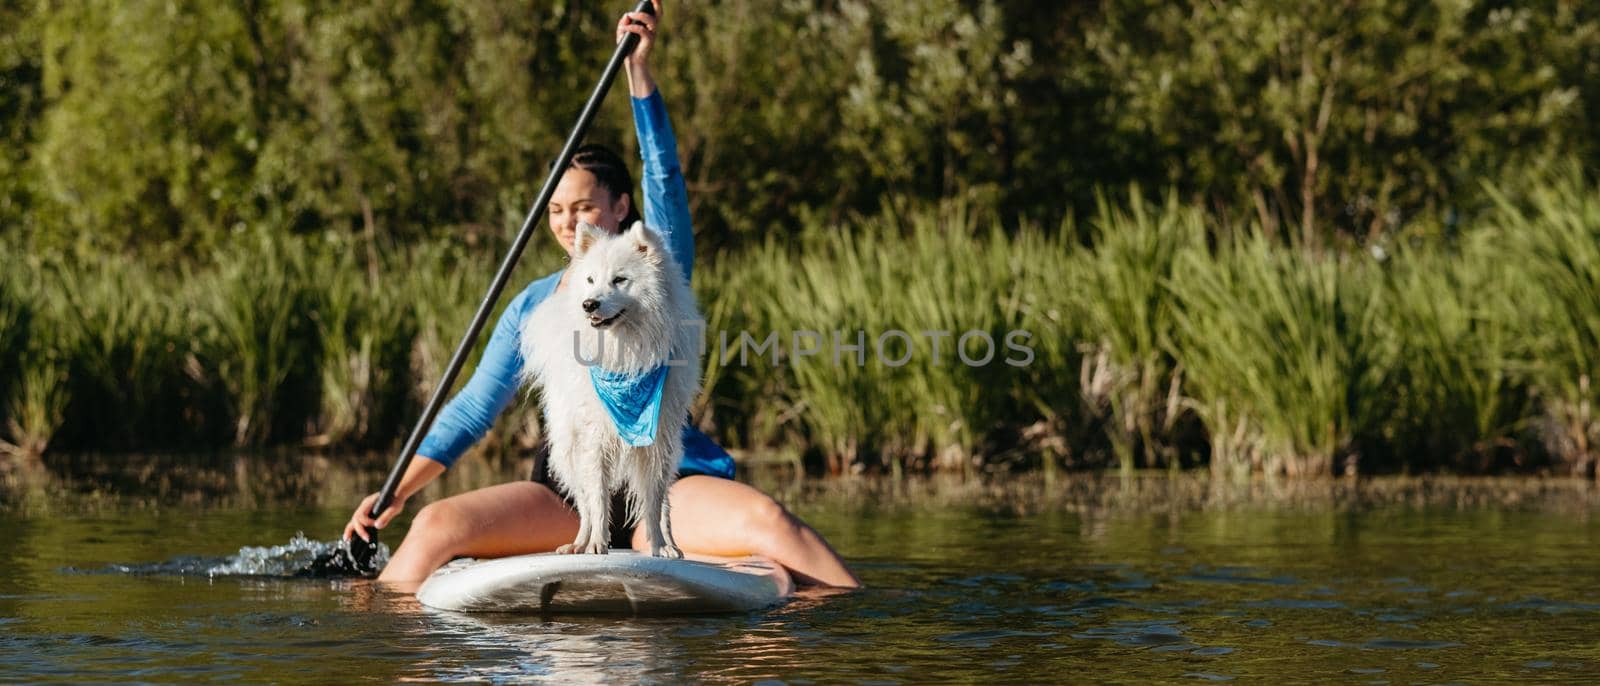 Young Woman Paddleboarding with Her Pet on the Lake, Snow-White Dog Breed Japanese Spitz Standing on Sup Board